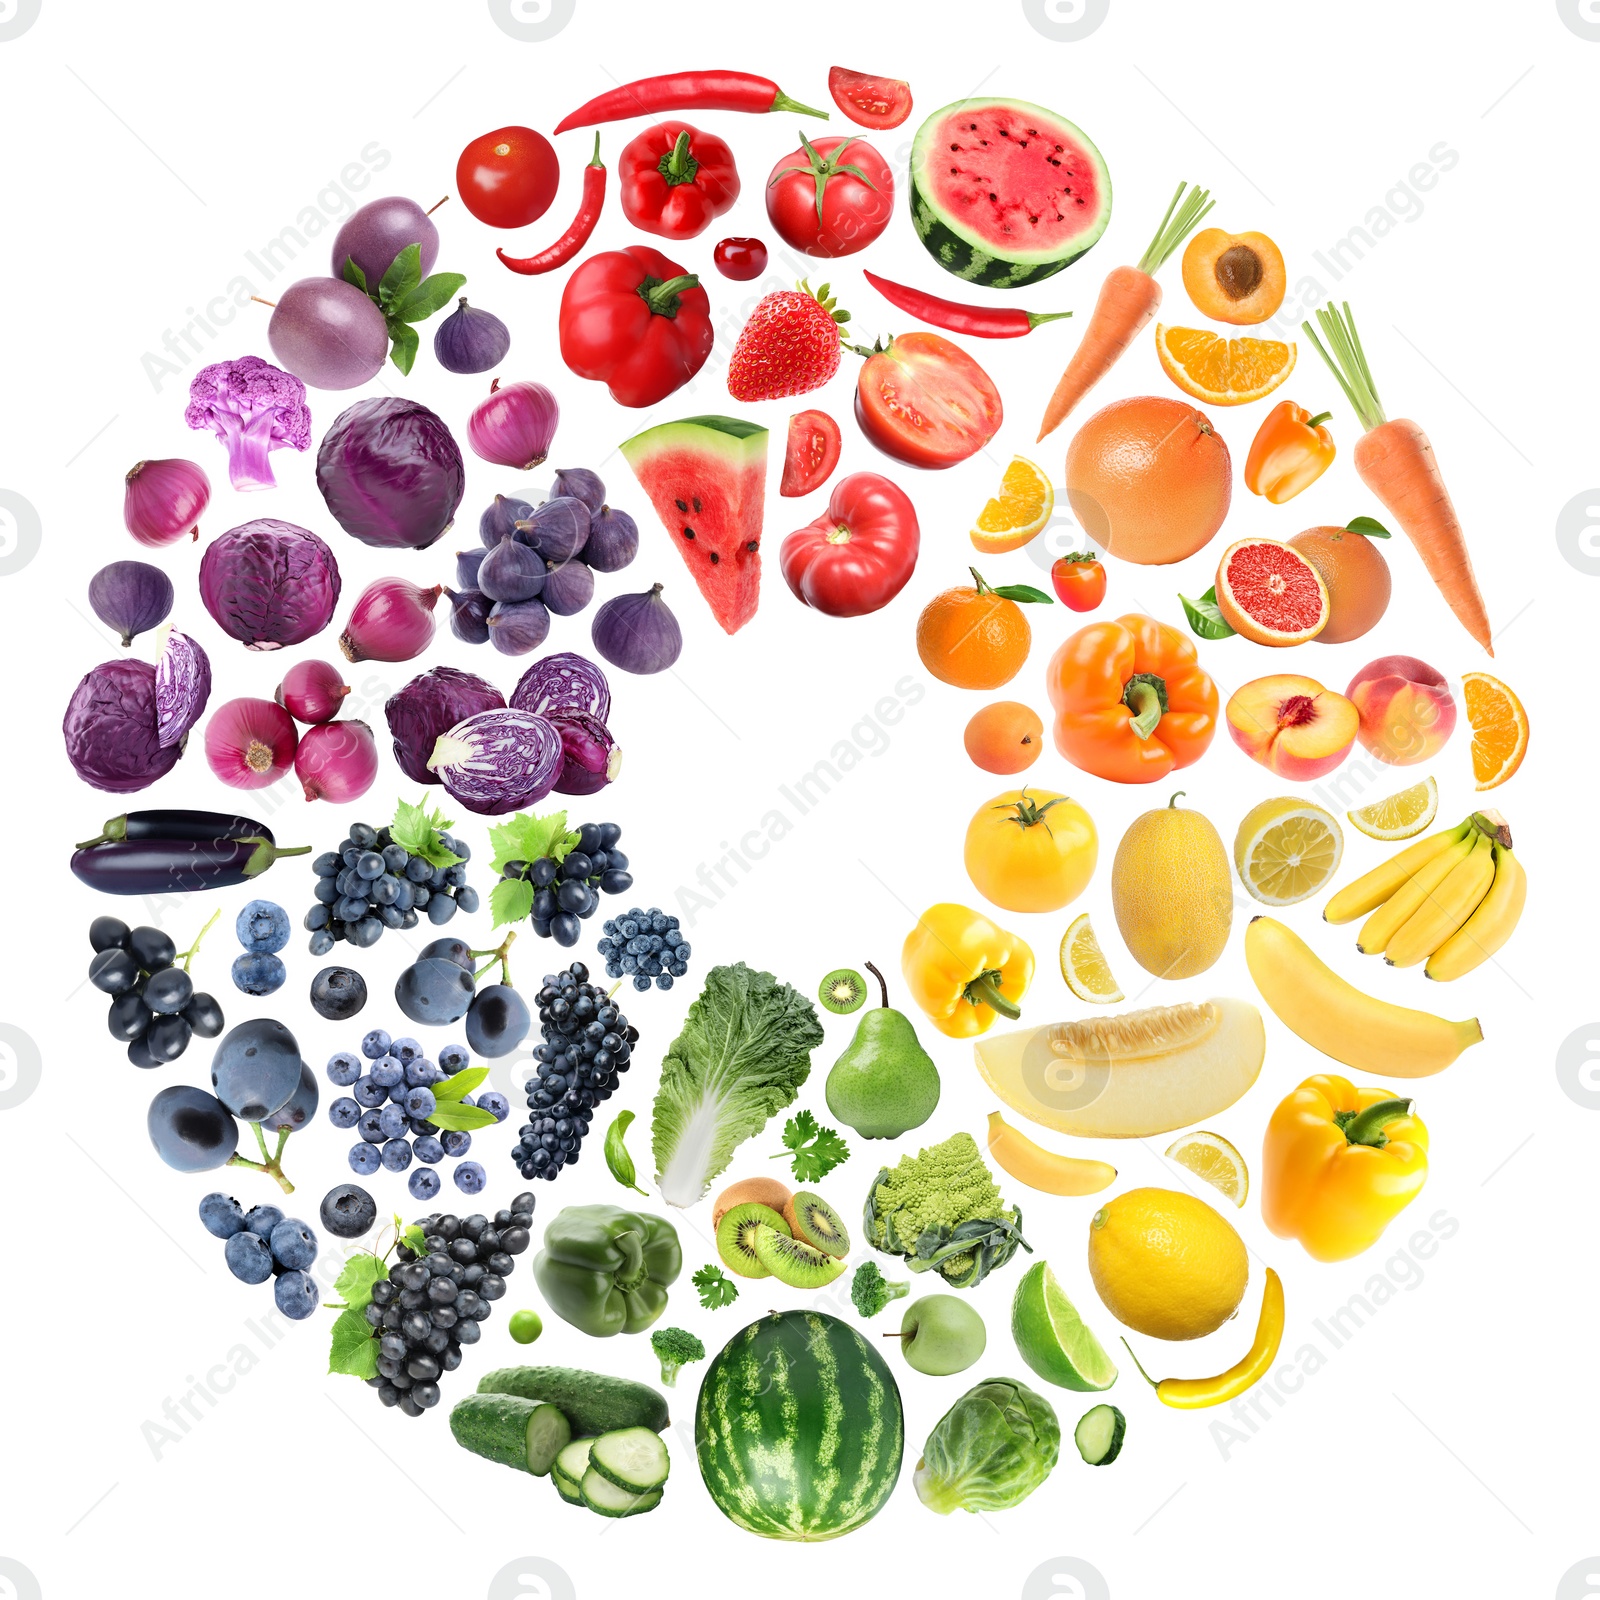 Image of Doughnut shape made of many fresh fruits and vegetables arranged in rainbow colors